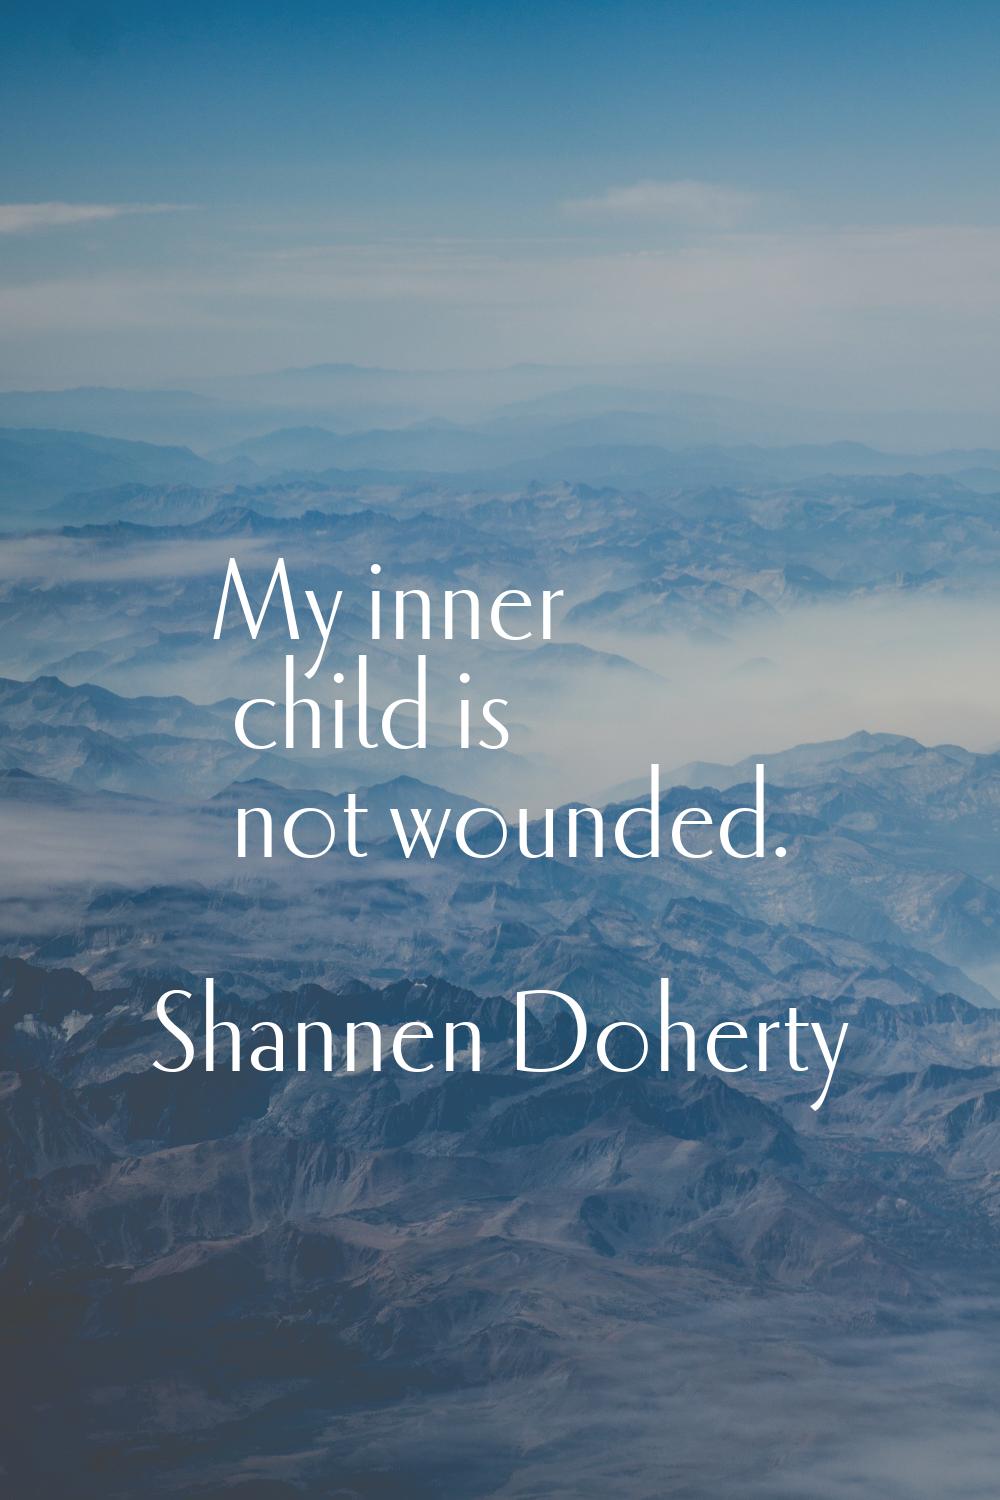 My inner child is not wounded.